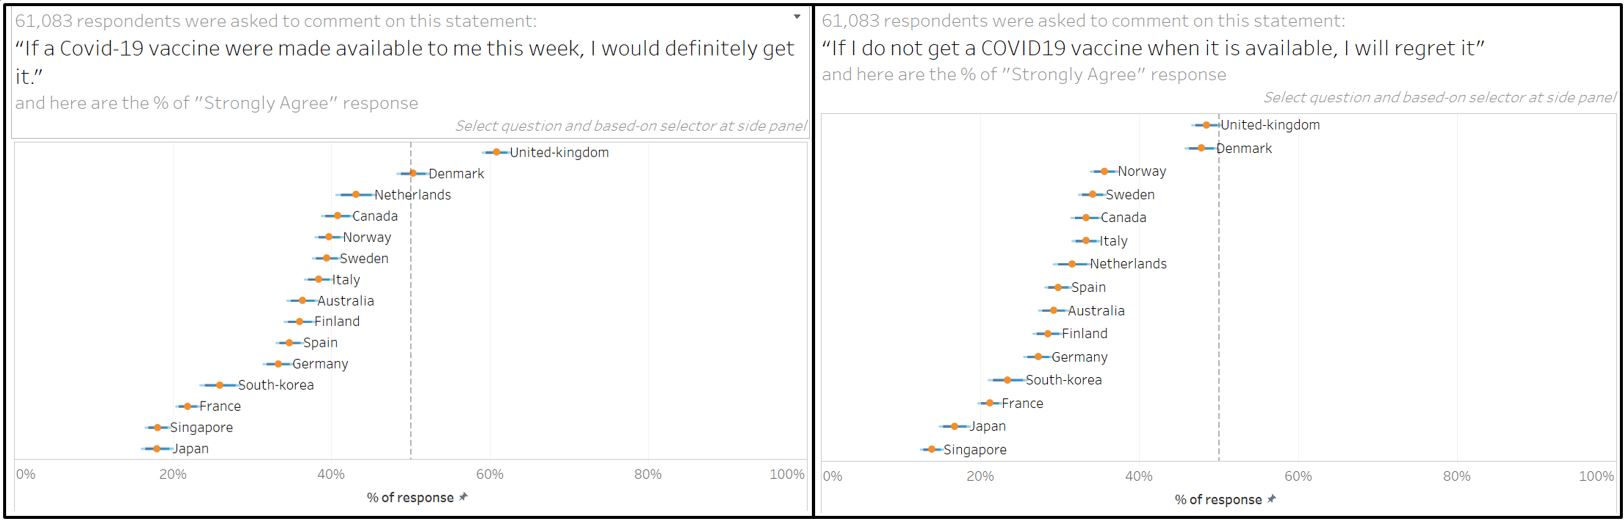 Which country is more positive towards vaccination?